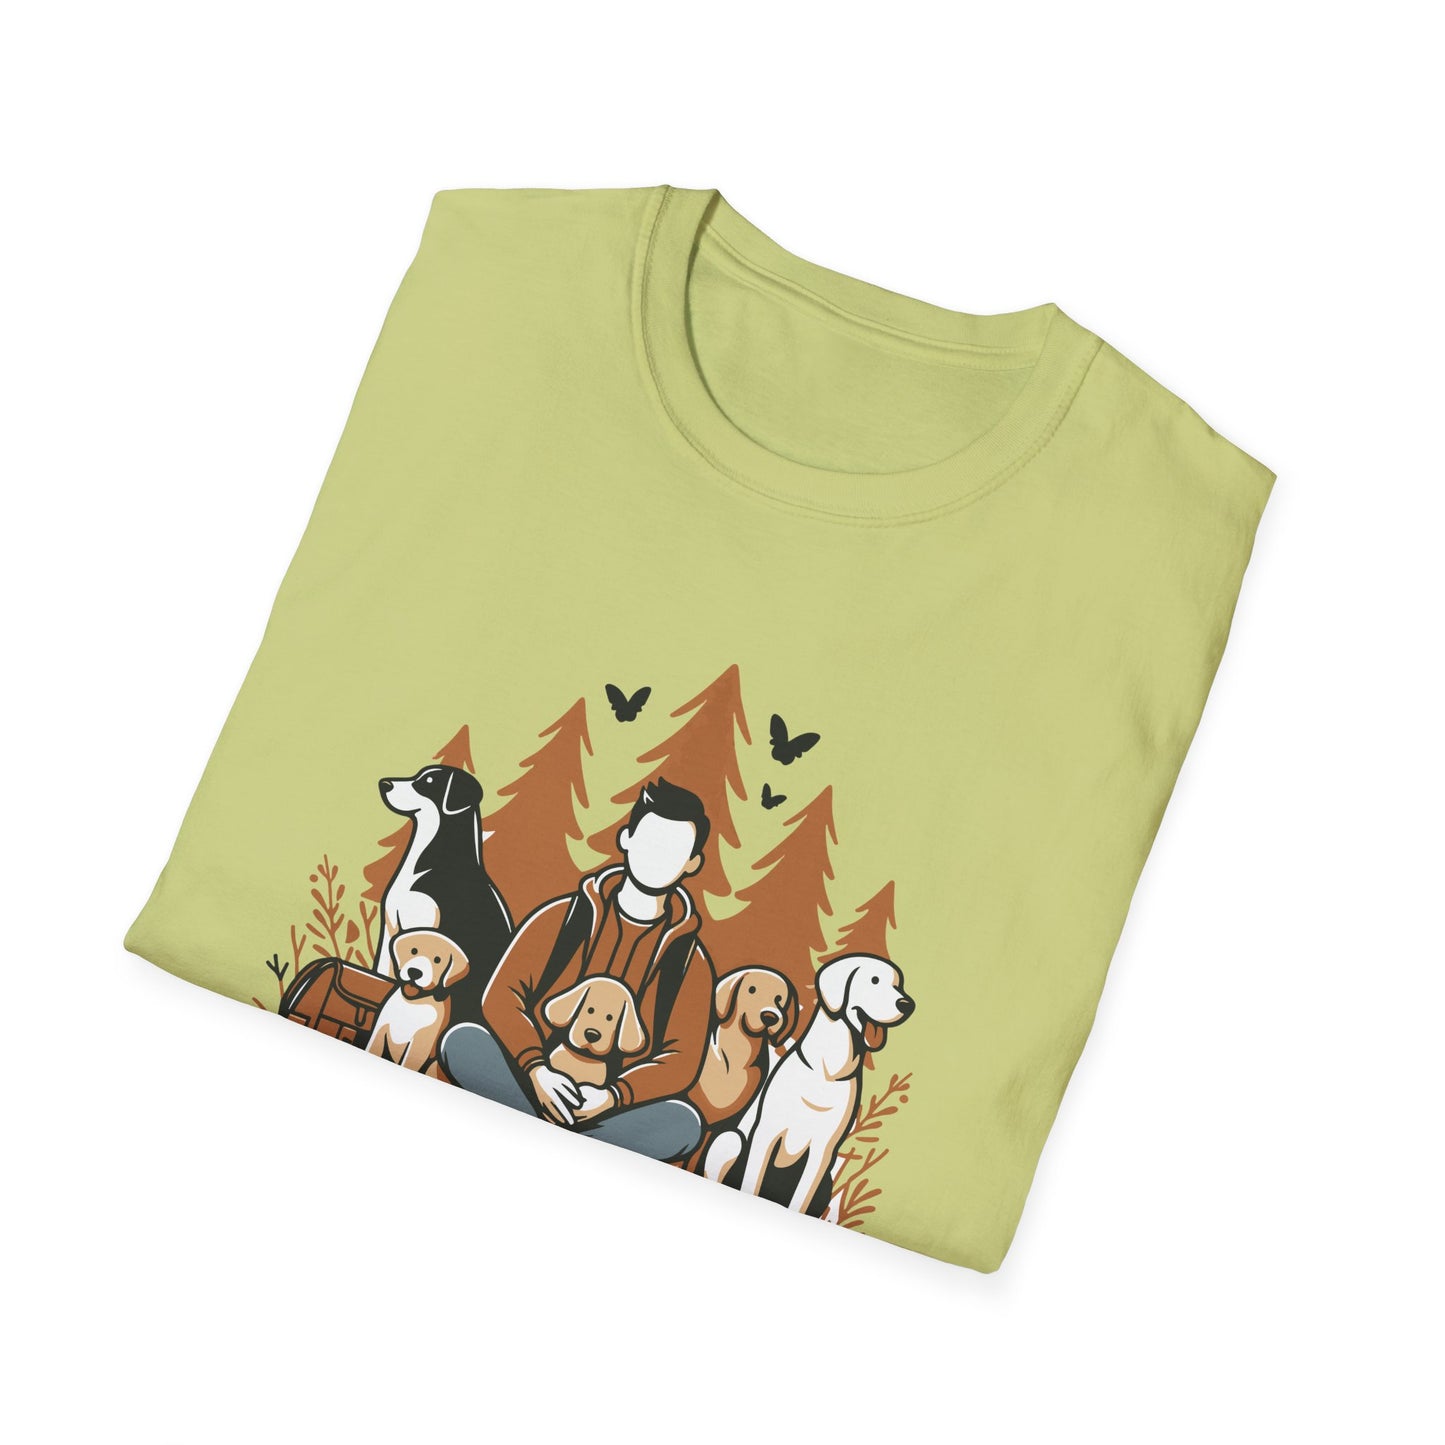 7 No Dogs Left Behind - Unisex Softstyle T-Shirt